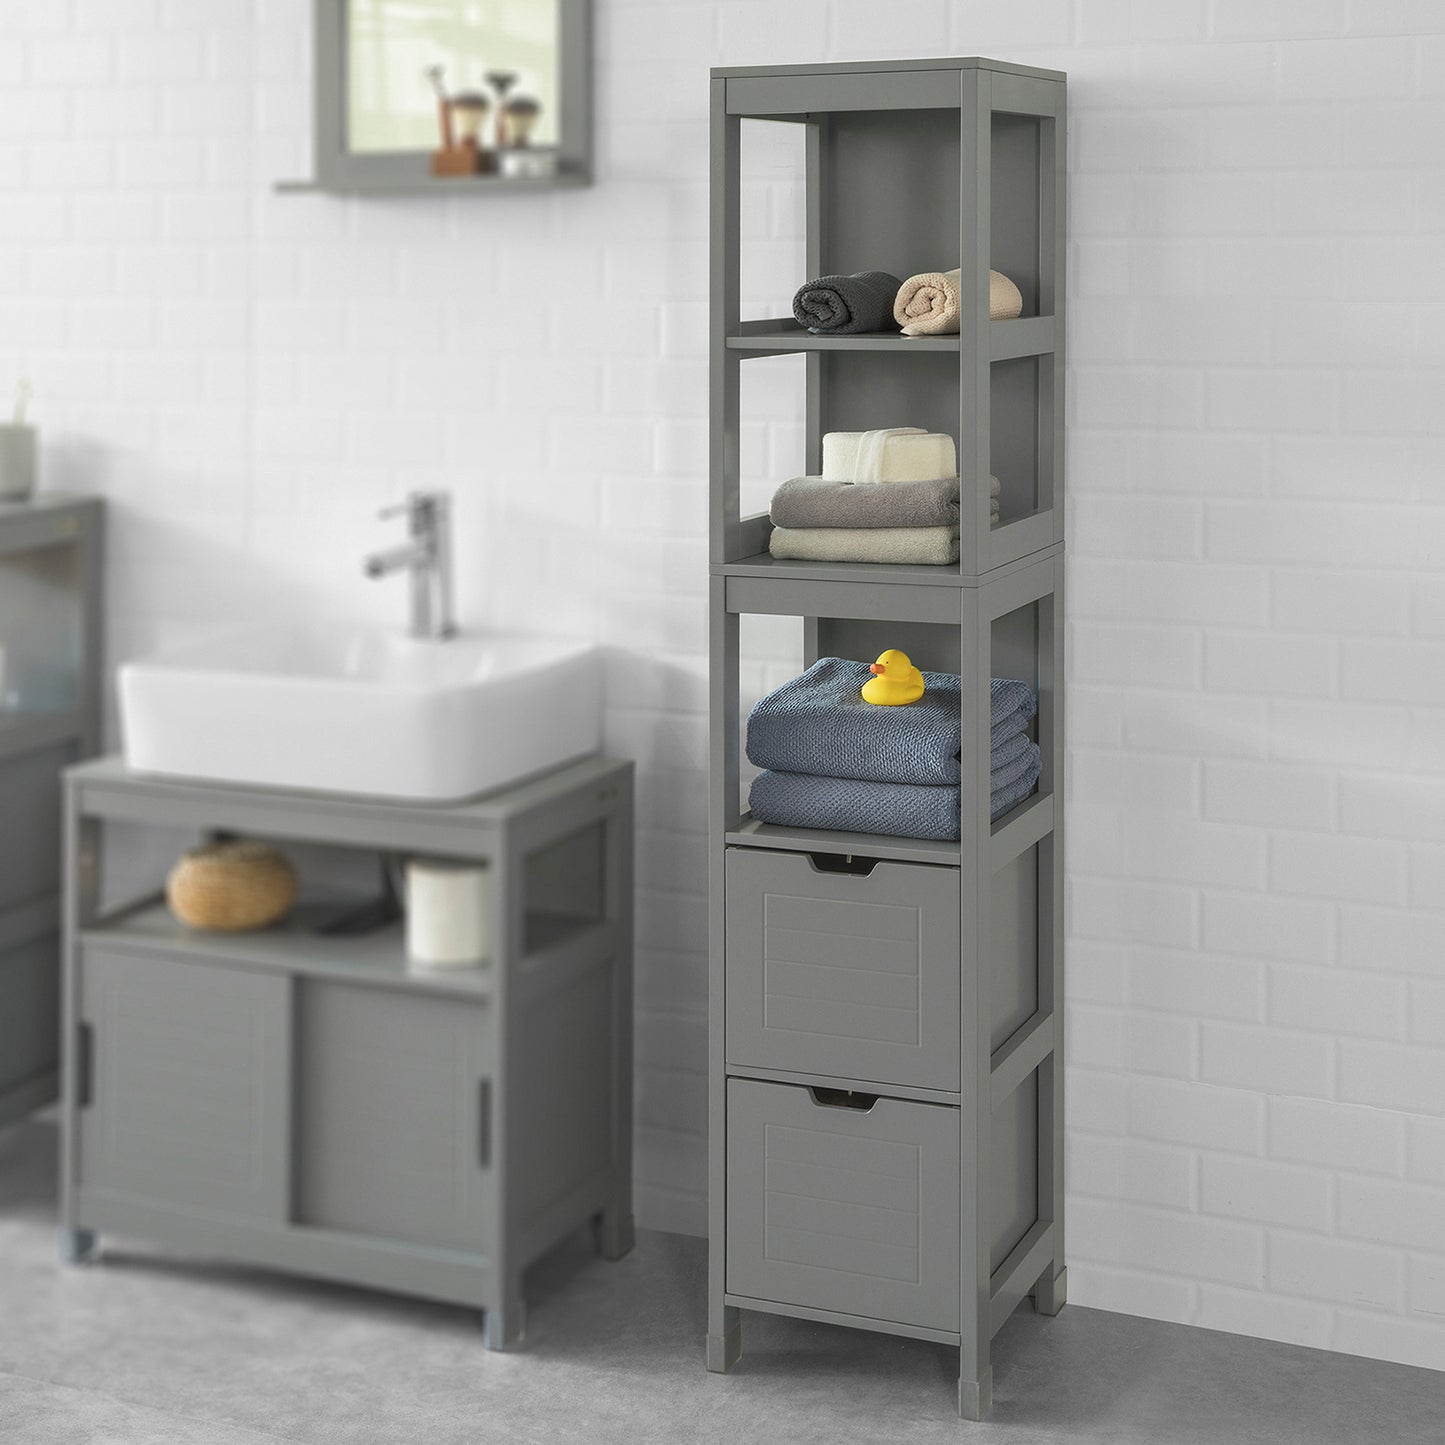 SoBuy Tall Cabinet with Shelf, Tall Cupboard with Drawer, Grey